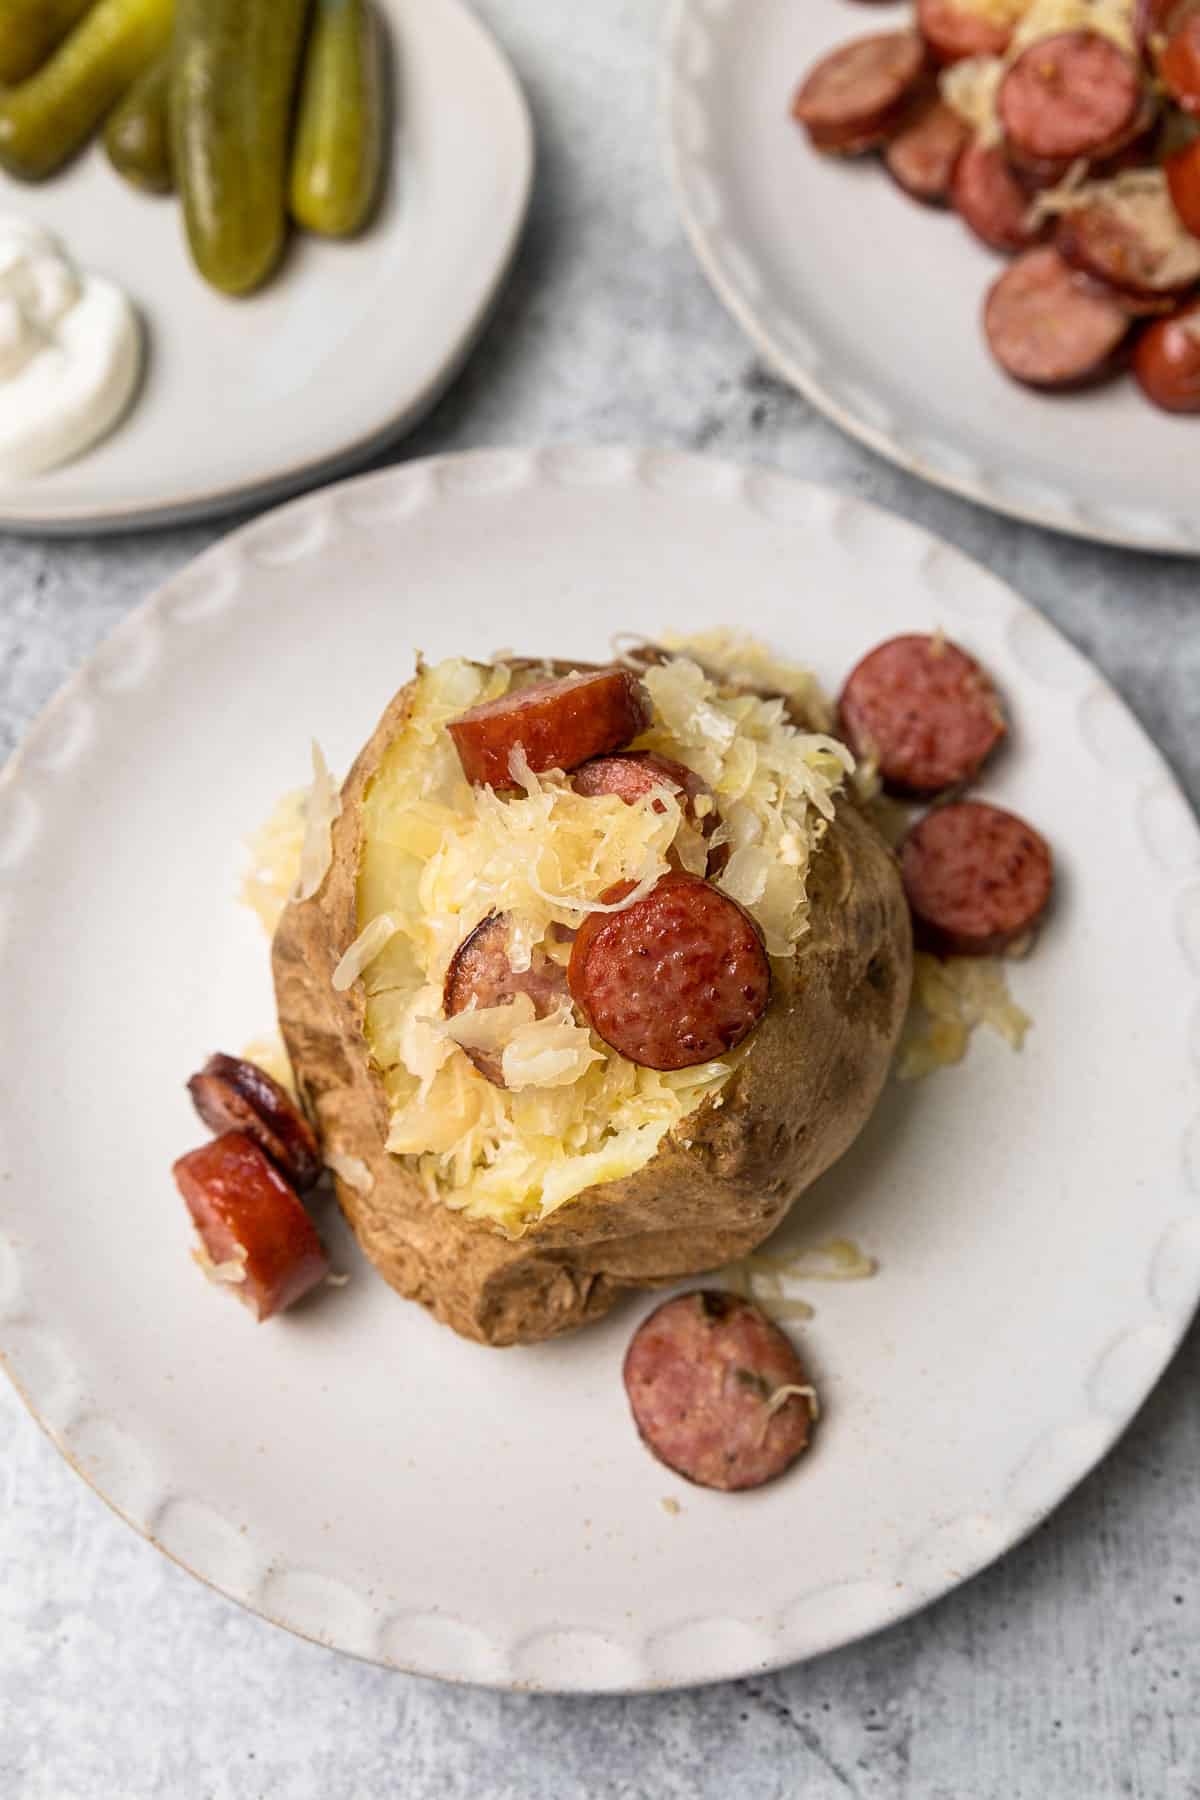 baked potato topped with sausage slices and sauerkraut